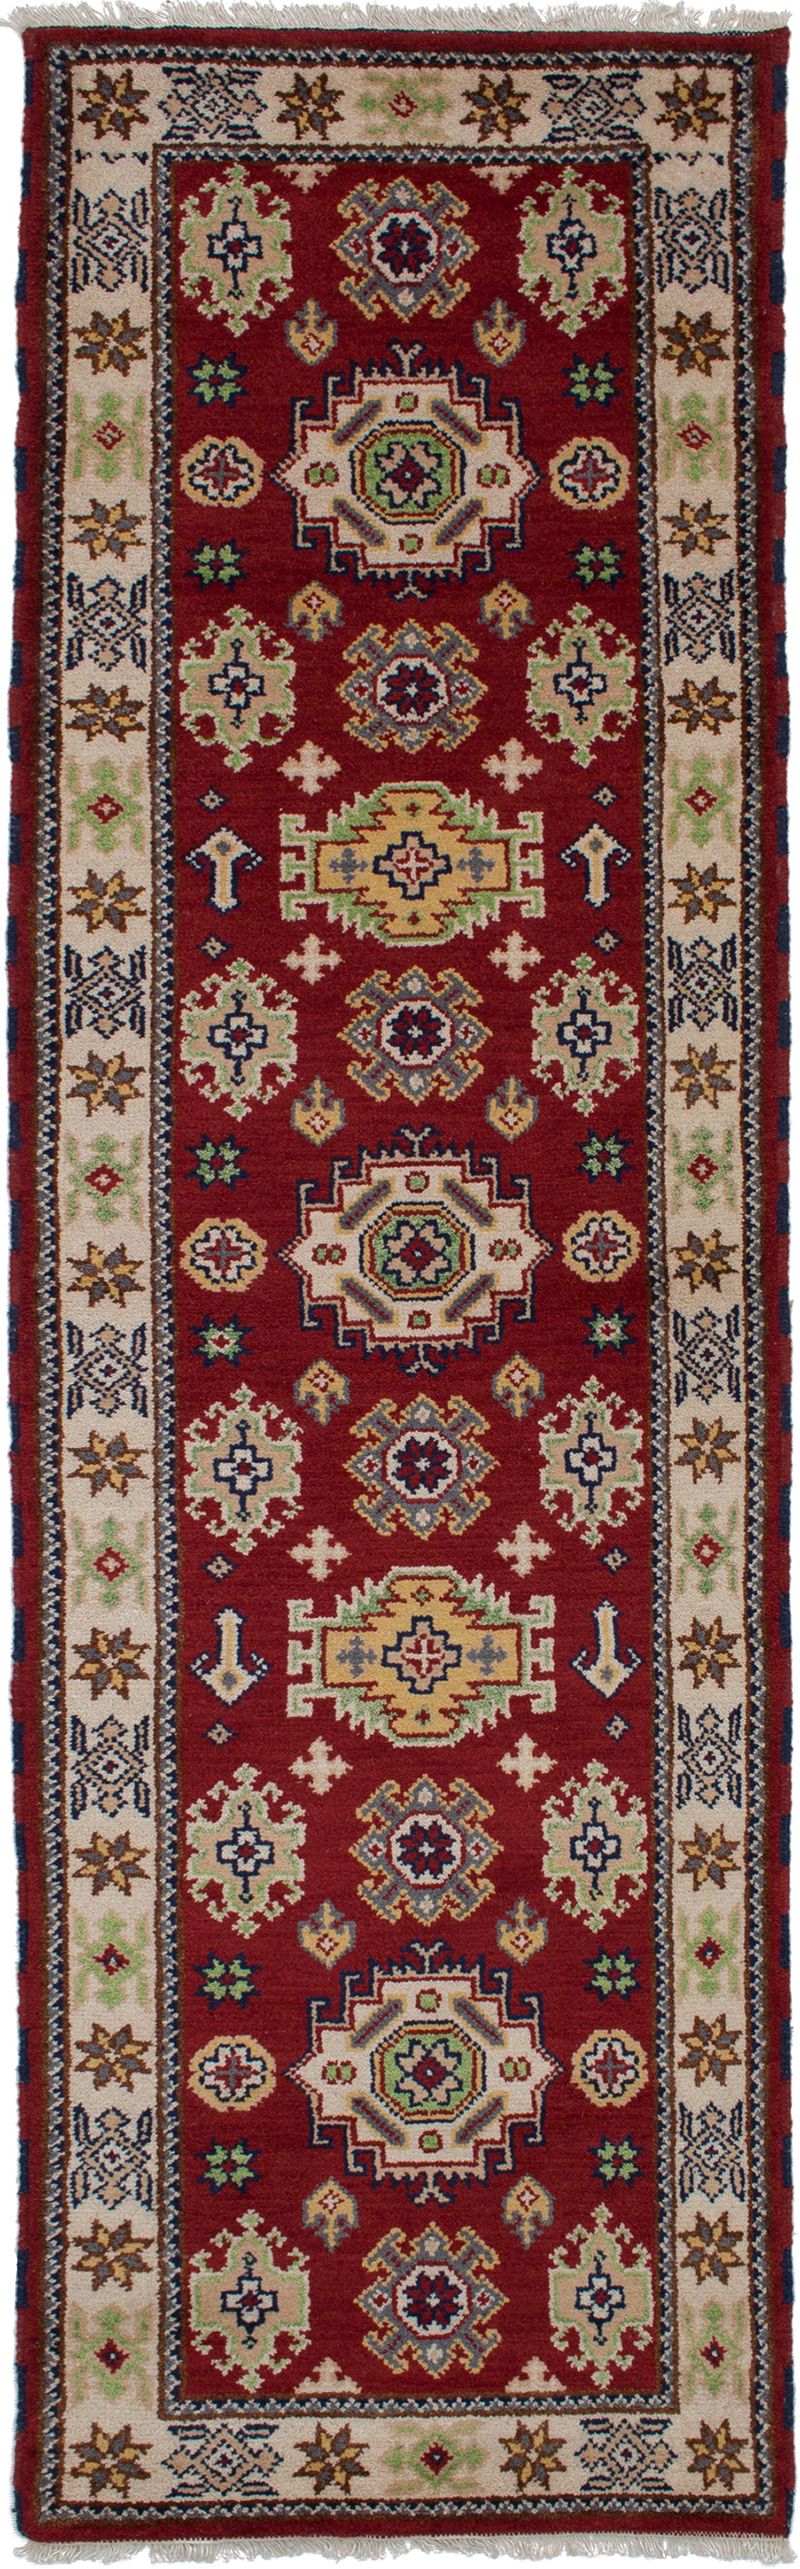 Hand-knotted Royal Kazak Red Wool Rug 2'10" x 10'1"  Size: 2'10" x 10'1"  